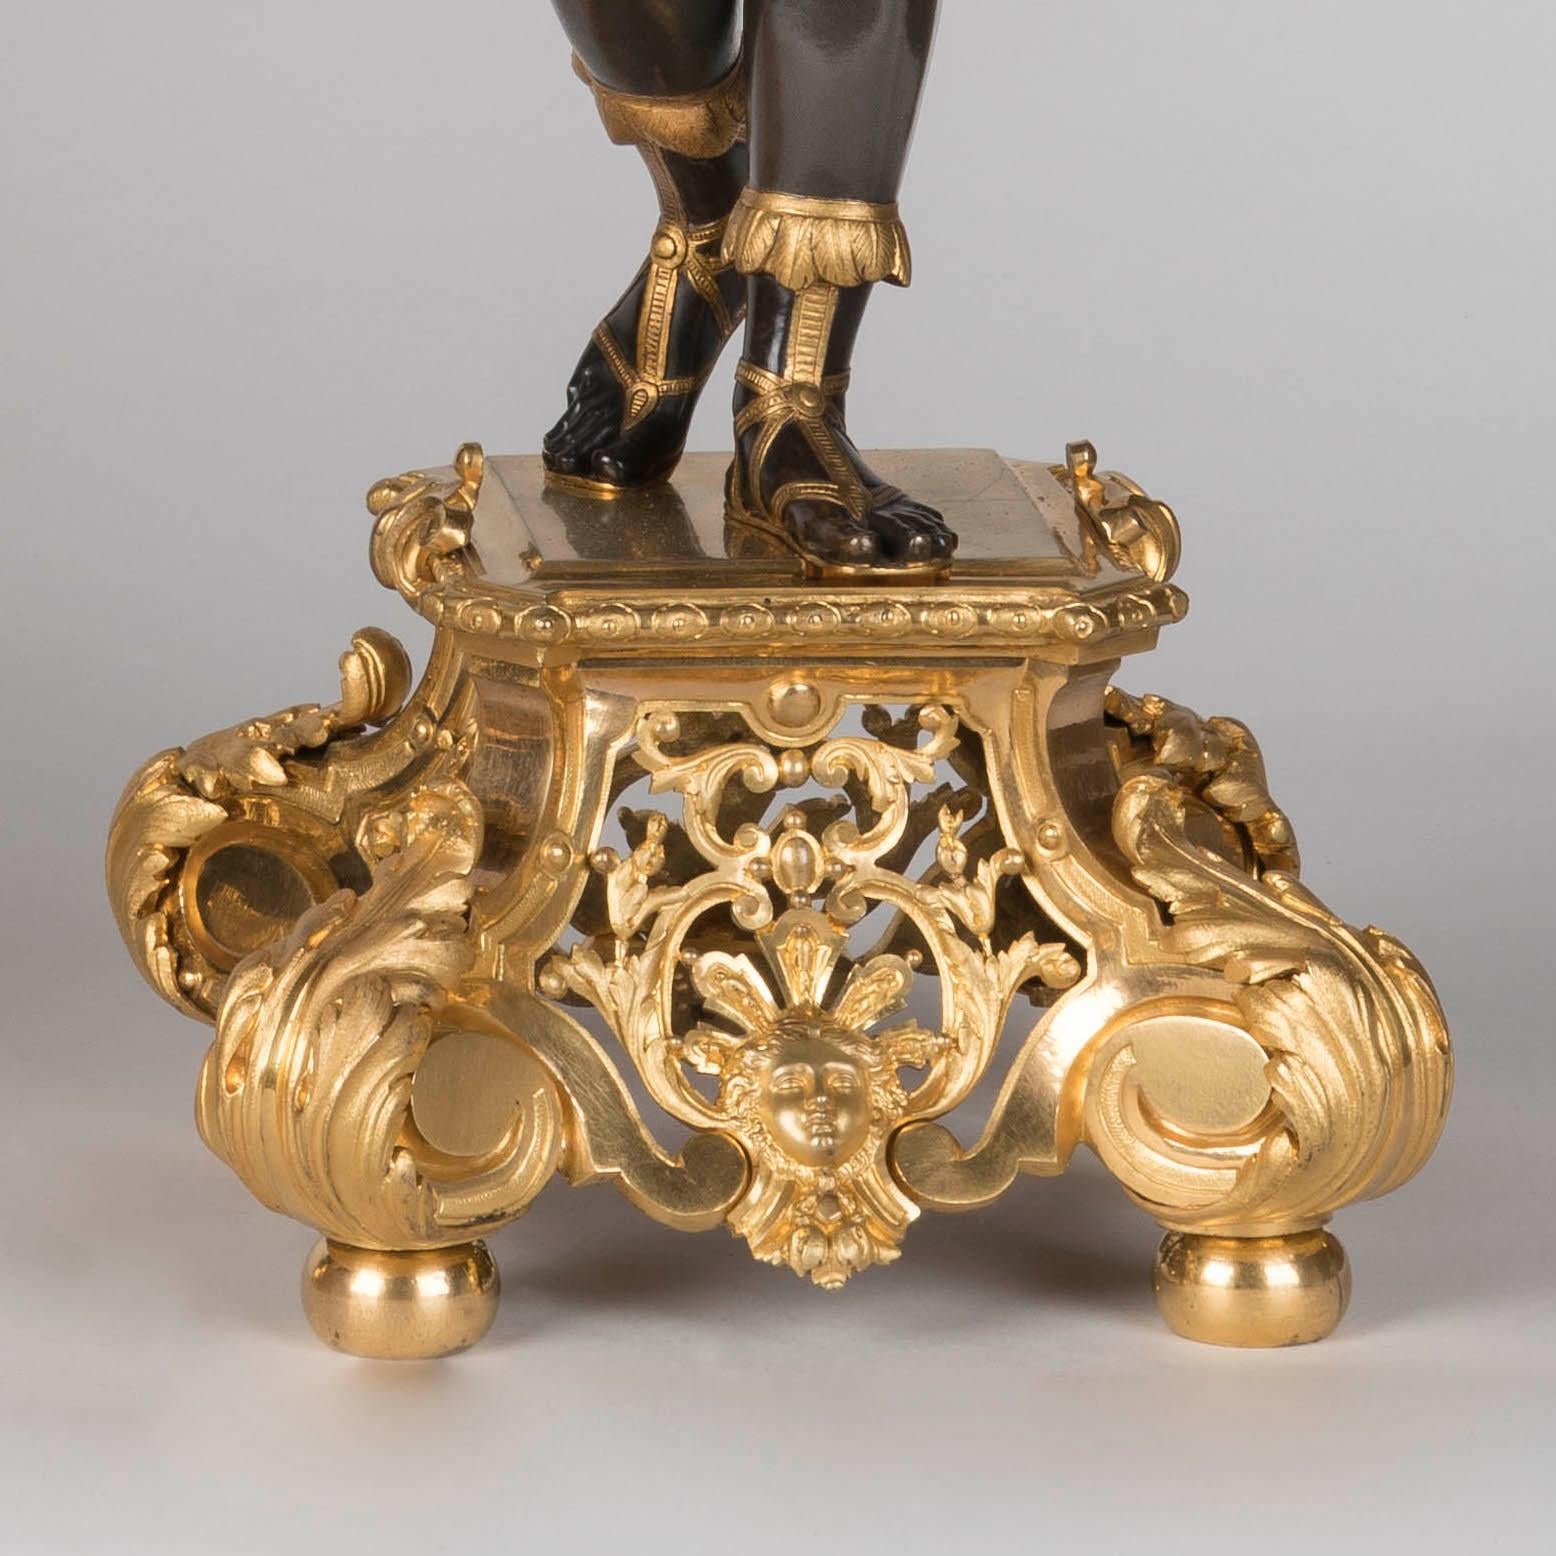 Pair of Large 19th Century Bronze and Gilded Figural Candelabra by Denière For Sale 5